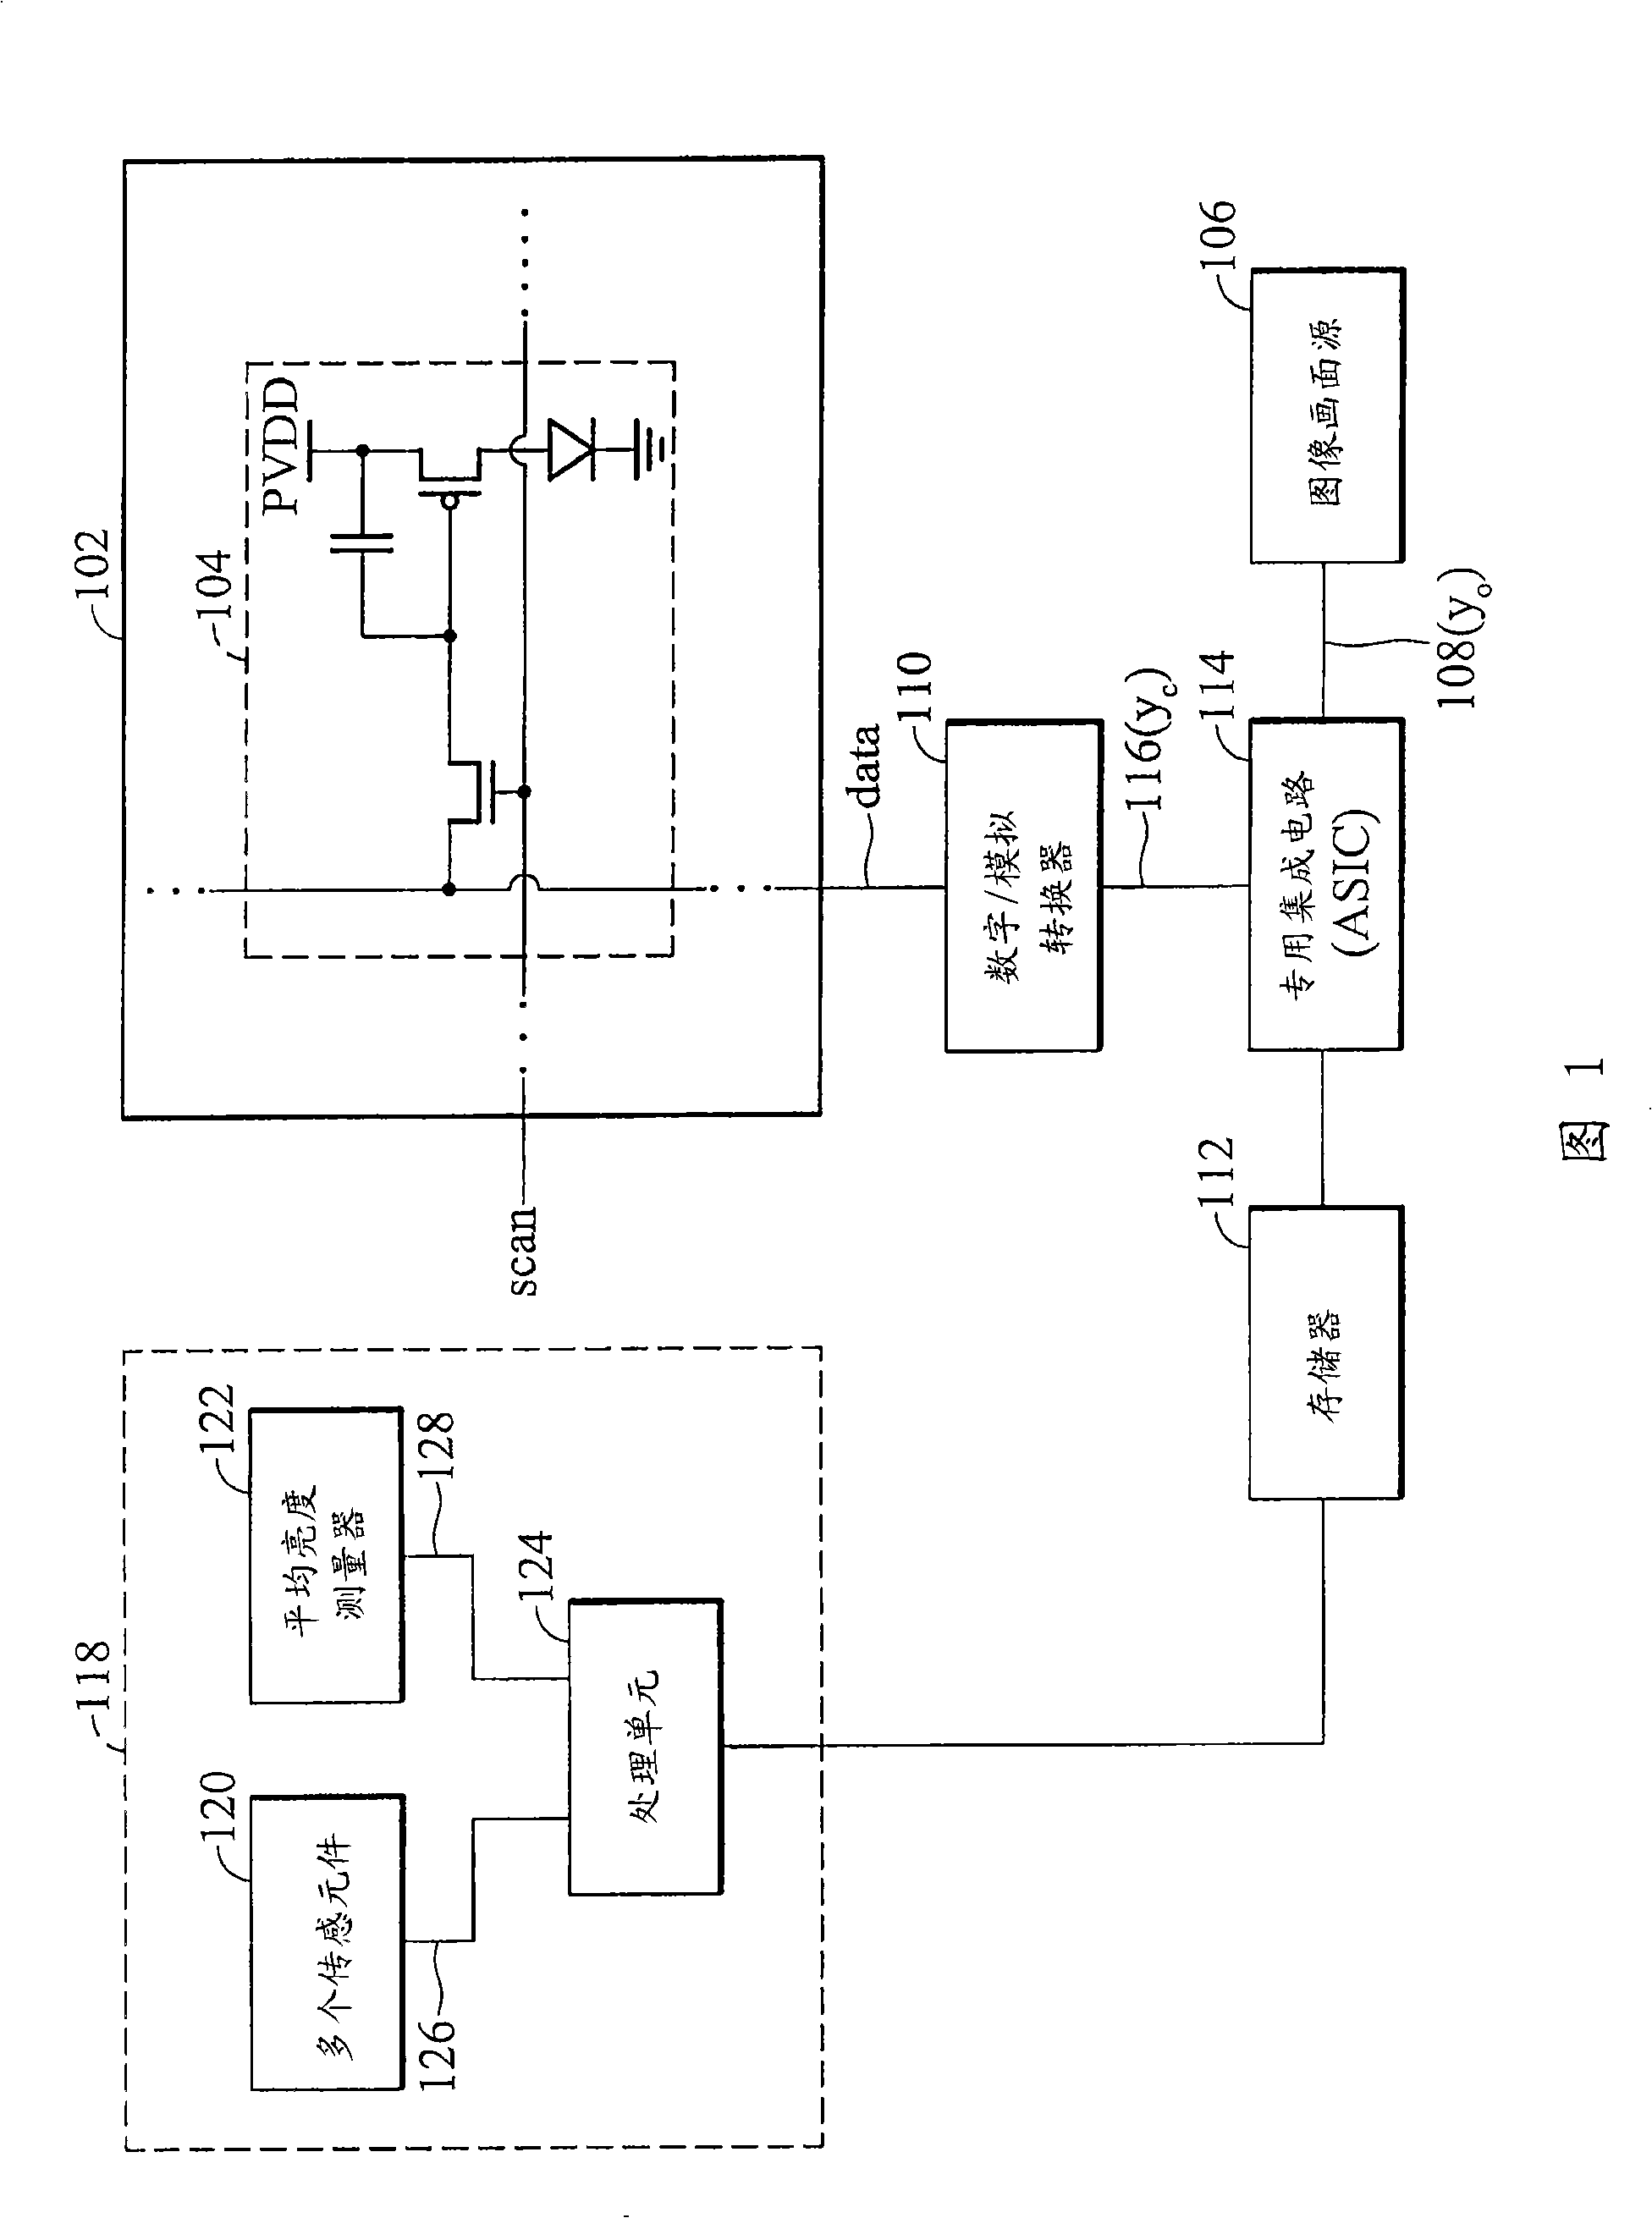 Image display system and its moire defect elimination method